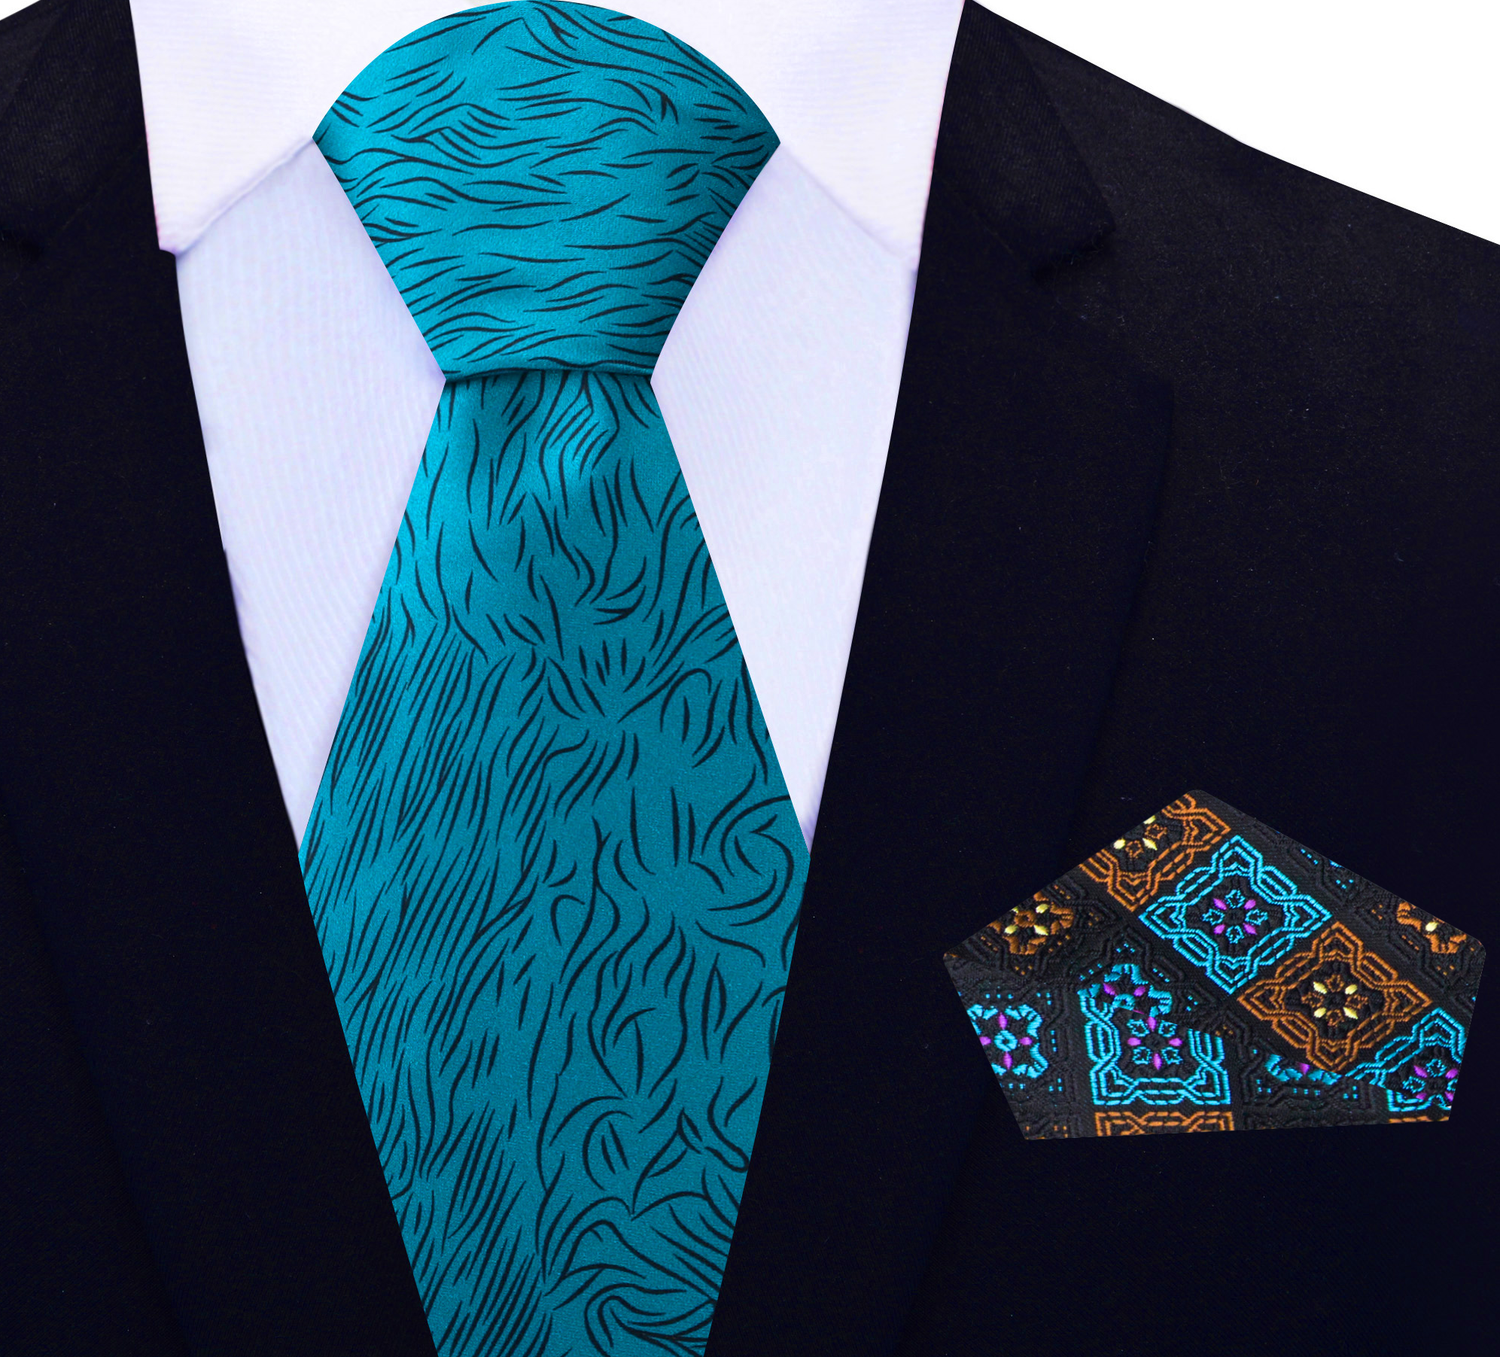 Teal Blue, Black Abstract Lines Tie with Accenting Black, Teal and Brown Geometric Square